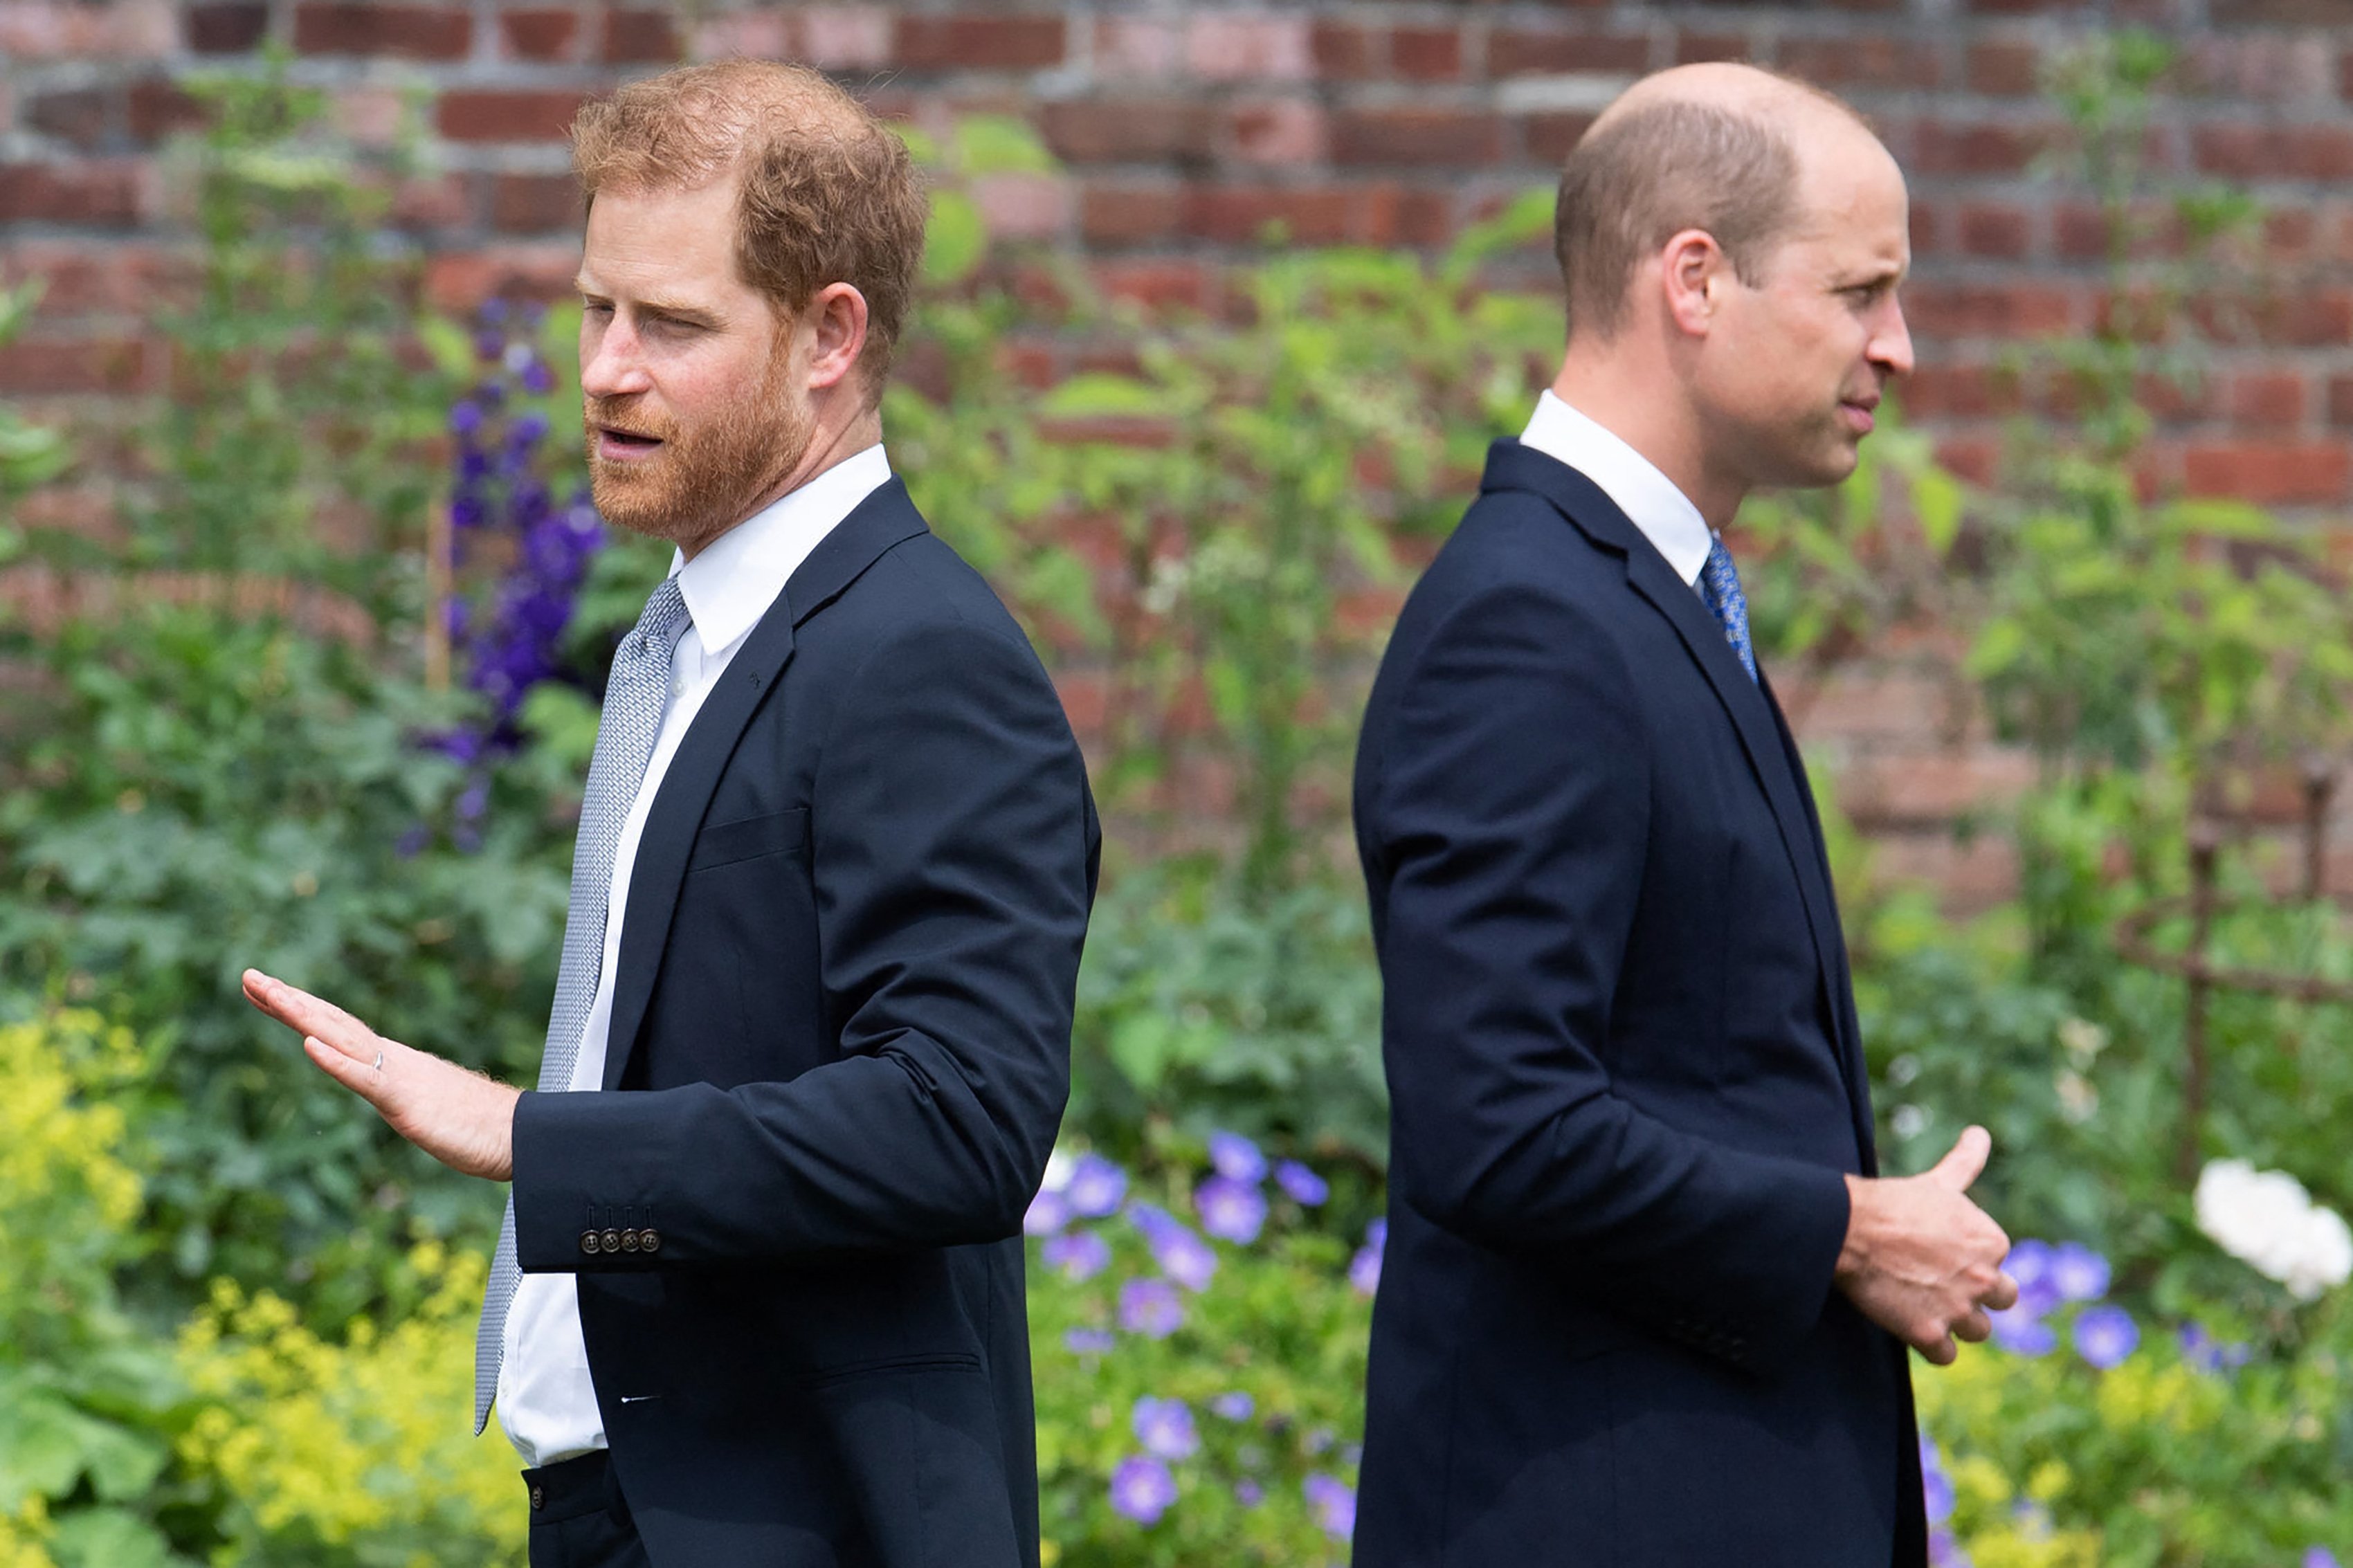 Prince Harry, Duke of Sussex and his brother Prince William, Duke of Cambridge at the unveiling of a statue of their mother, Princess Diana at The Sunken Garden on July 1, 2021 in Kensington Palace, London. | Source: Getty Images